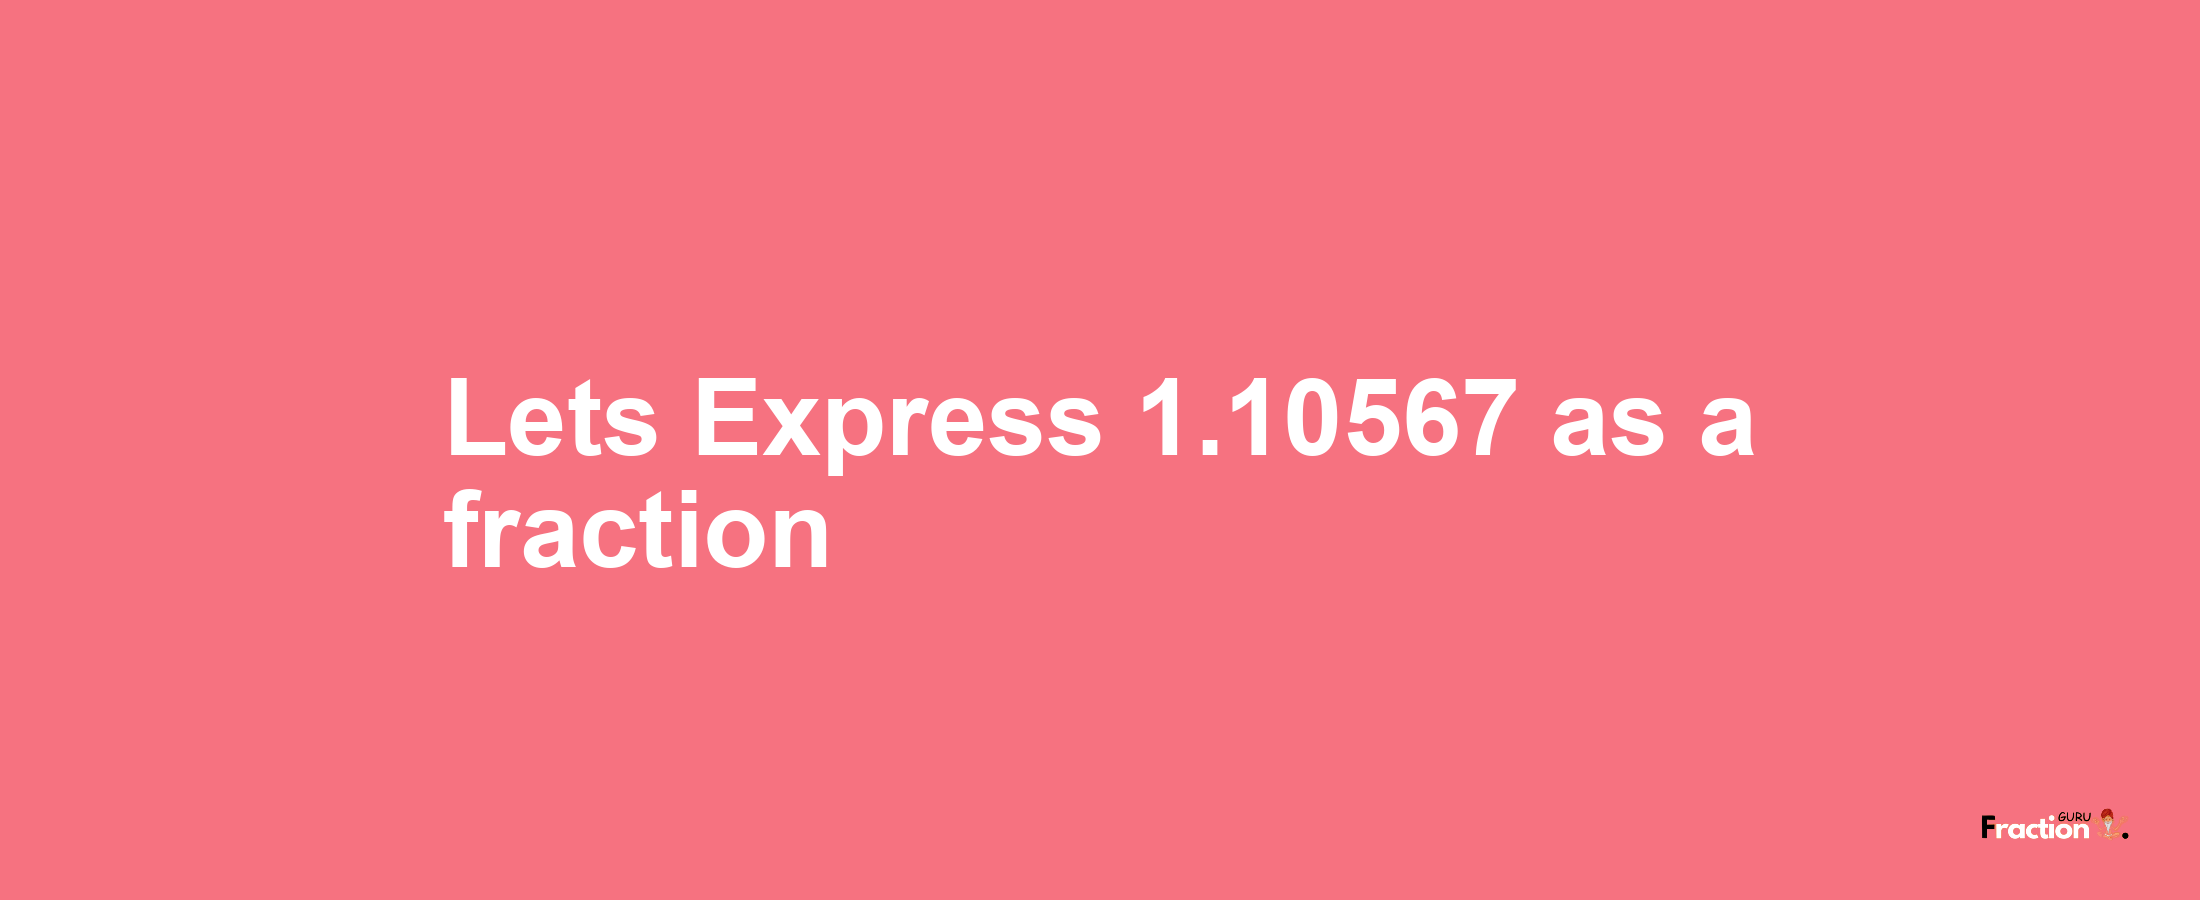 Lets Express 1.10567 as afraction